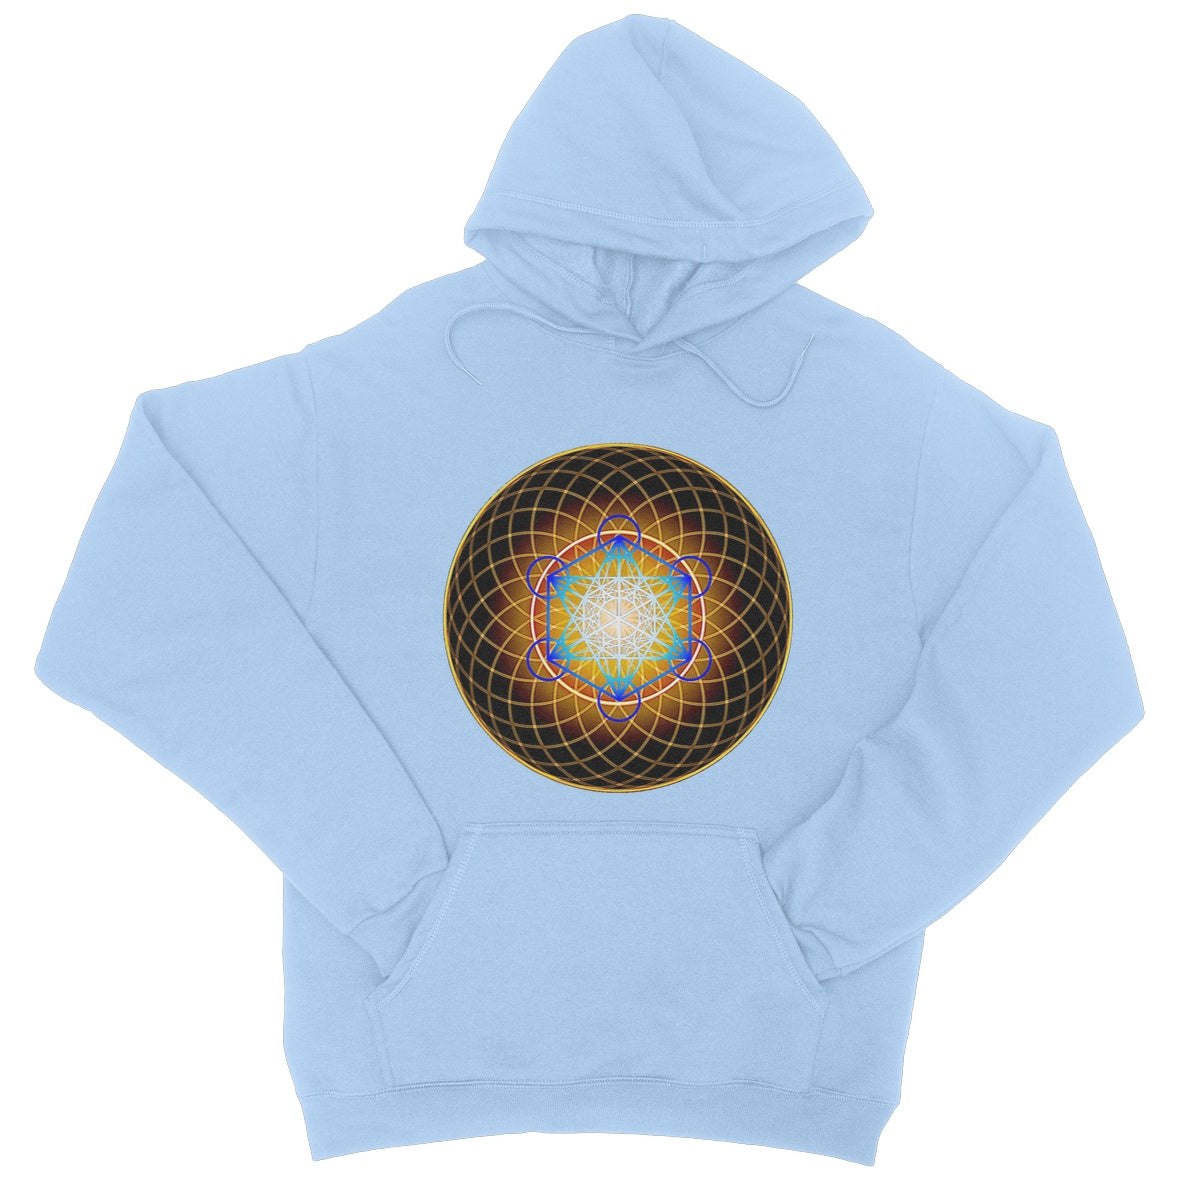 Metatron's Cube inside a New Flower of Life College Hoodie